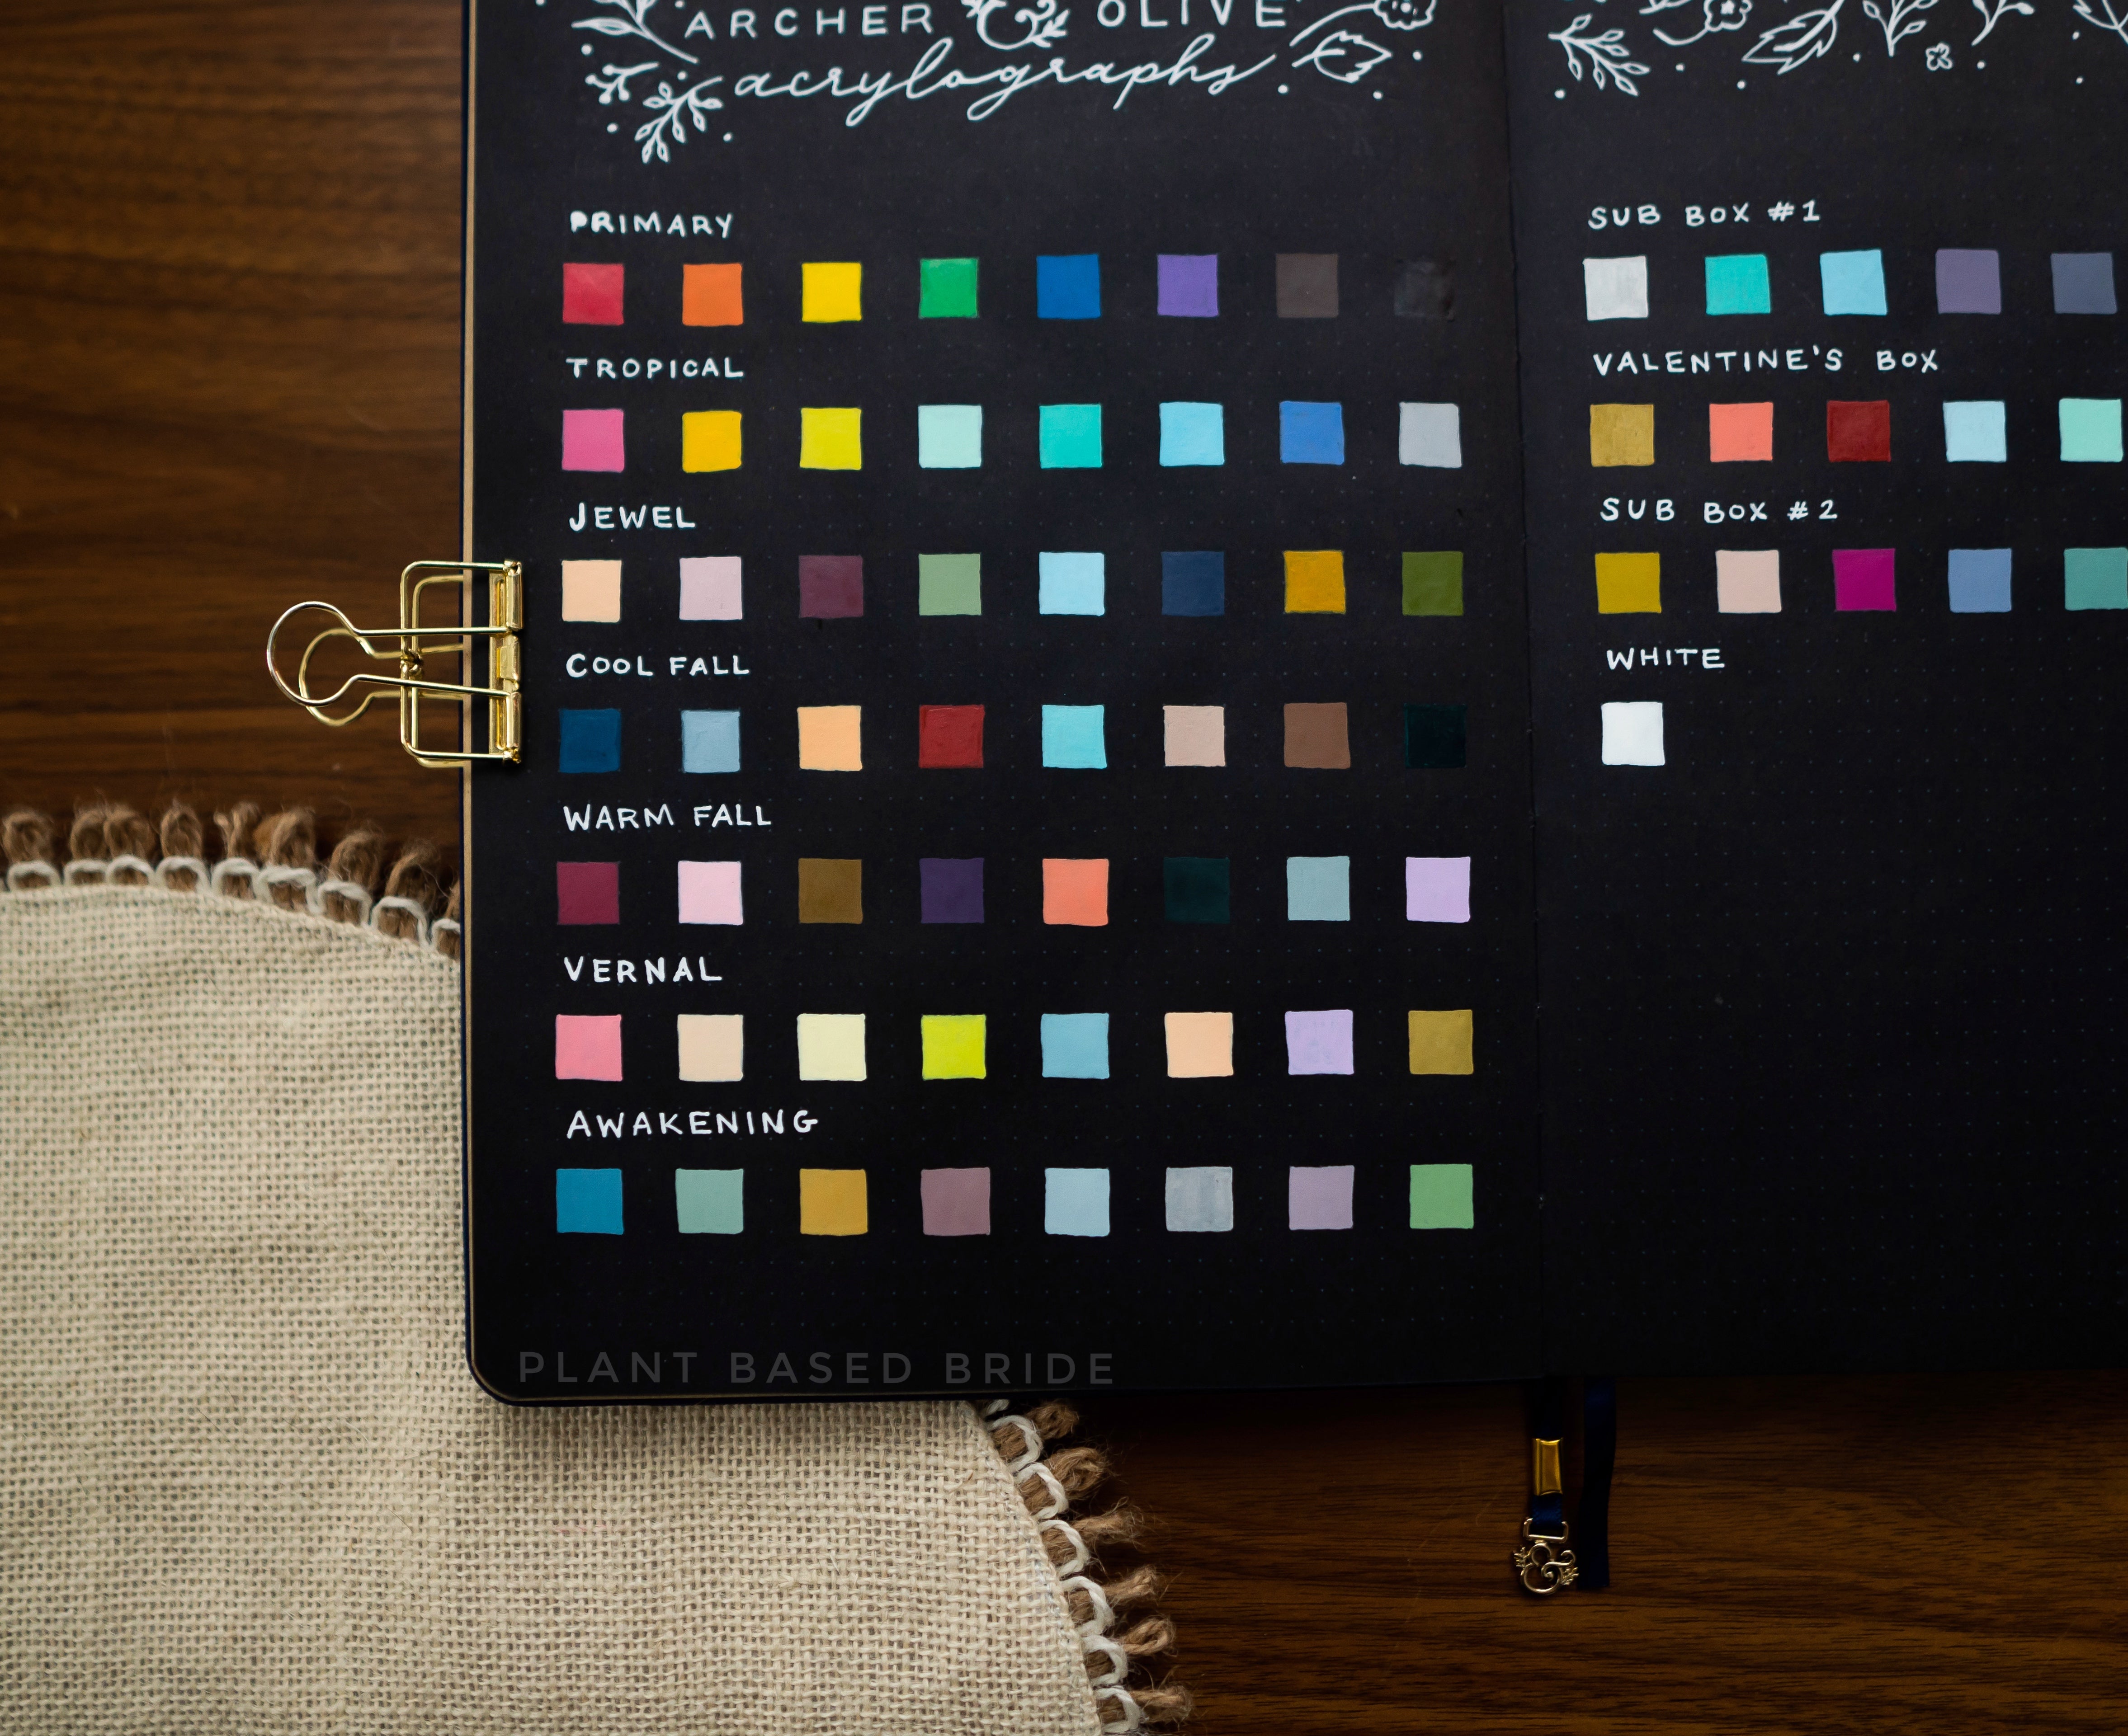 Archer & Olive Acrylograph Swatches Black Paper